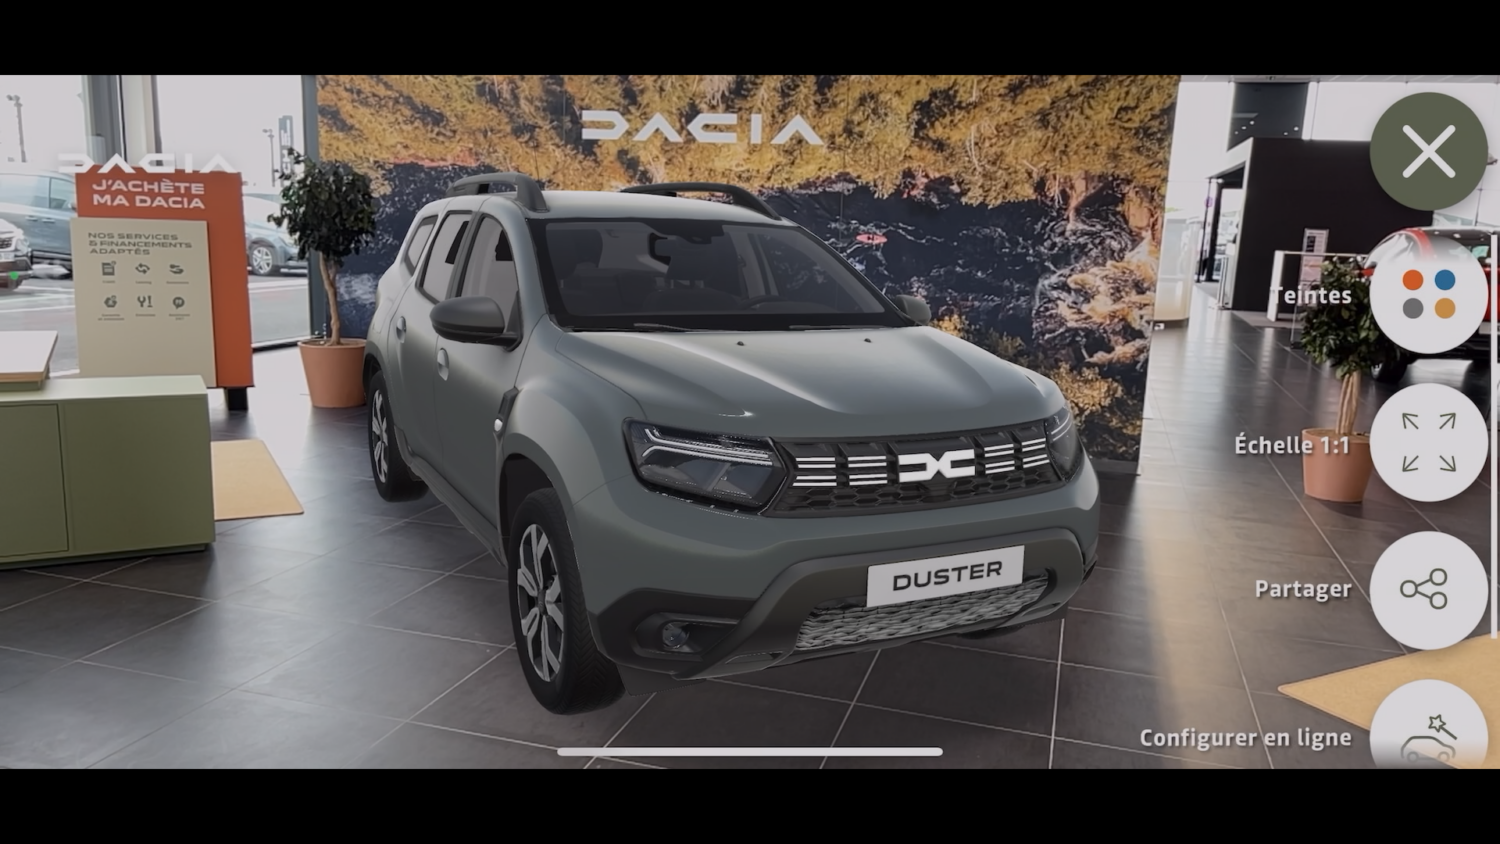 2-2022 - Dacia AR : the smart and useful augmented reality app